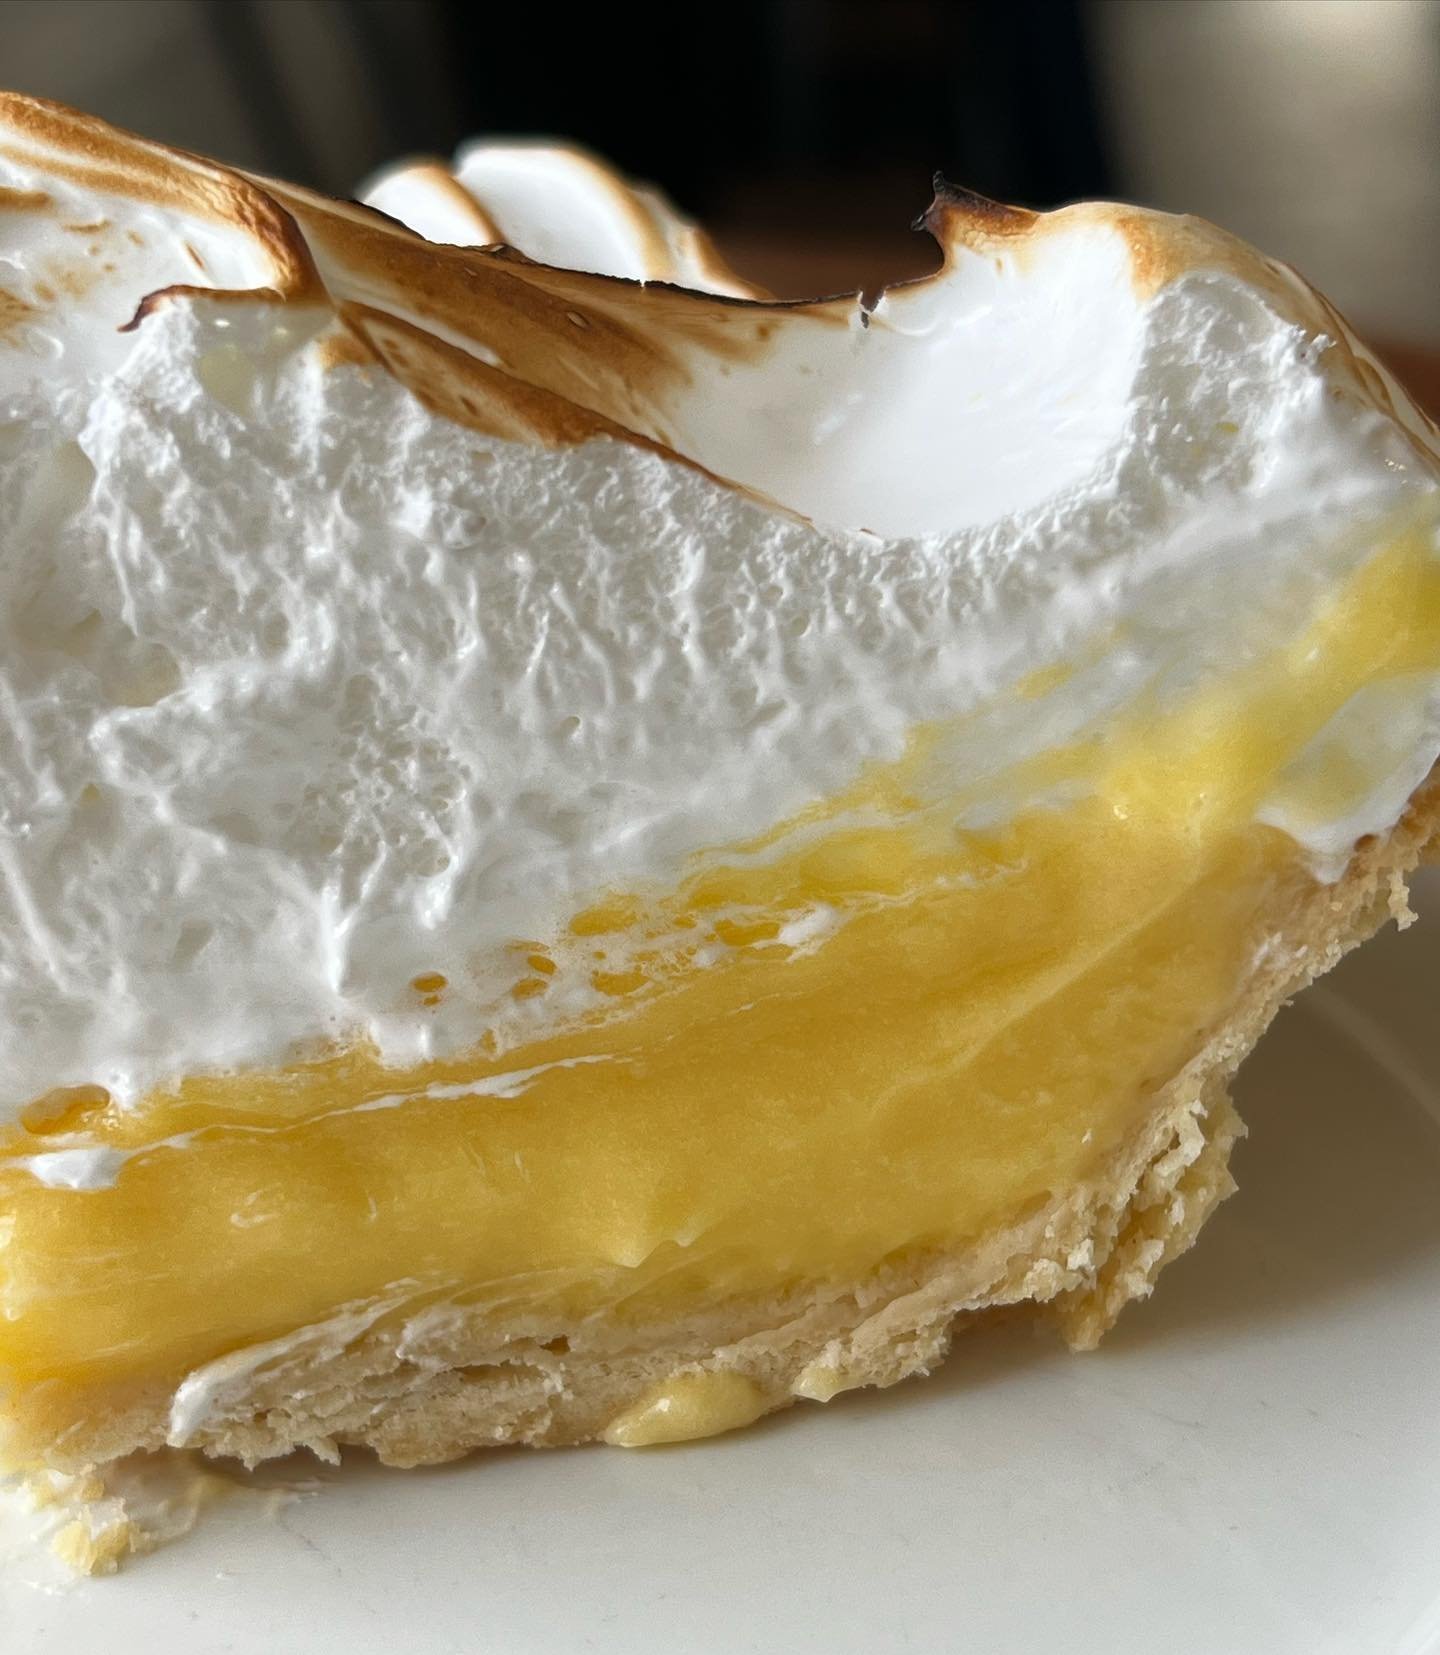 There's still time to order your pies for the long weekend!  Can you believe it's already May long weekend 😳. Let's hope it's as sunny and bright this weekend as our lemon meringue pie is! 

https://checkout.square.site/merchant/6GPD56Z0EVX08/checko